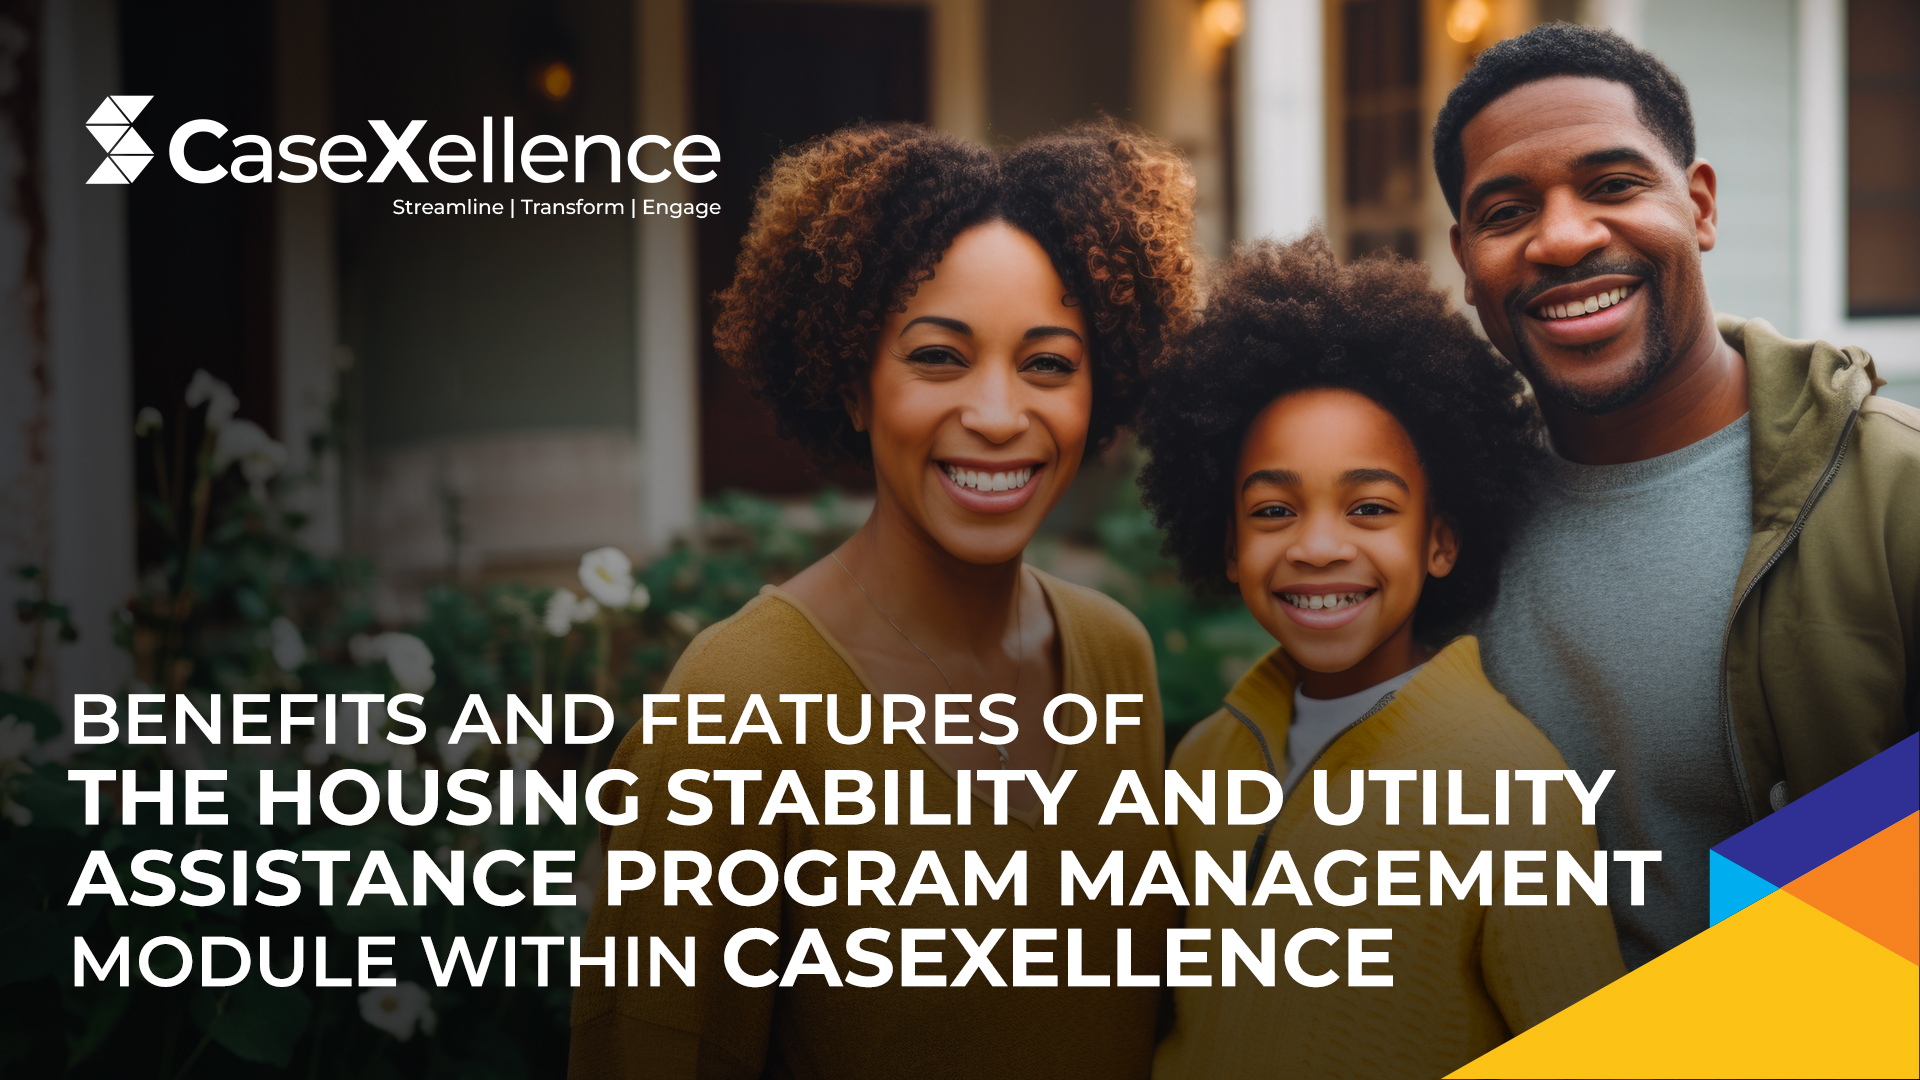 Benefits and Features of the Housing Stability and Utility Assistance Program Management Module within CaseXellence